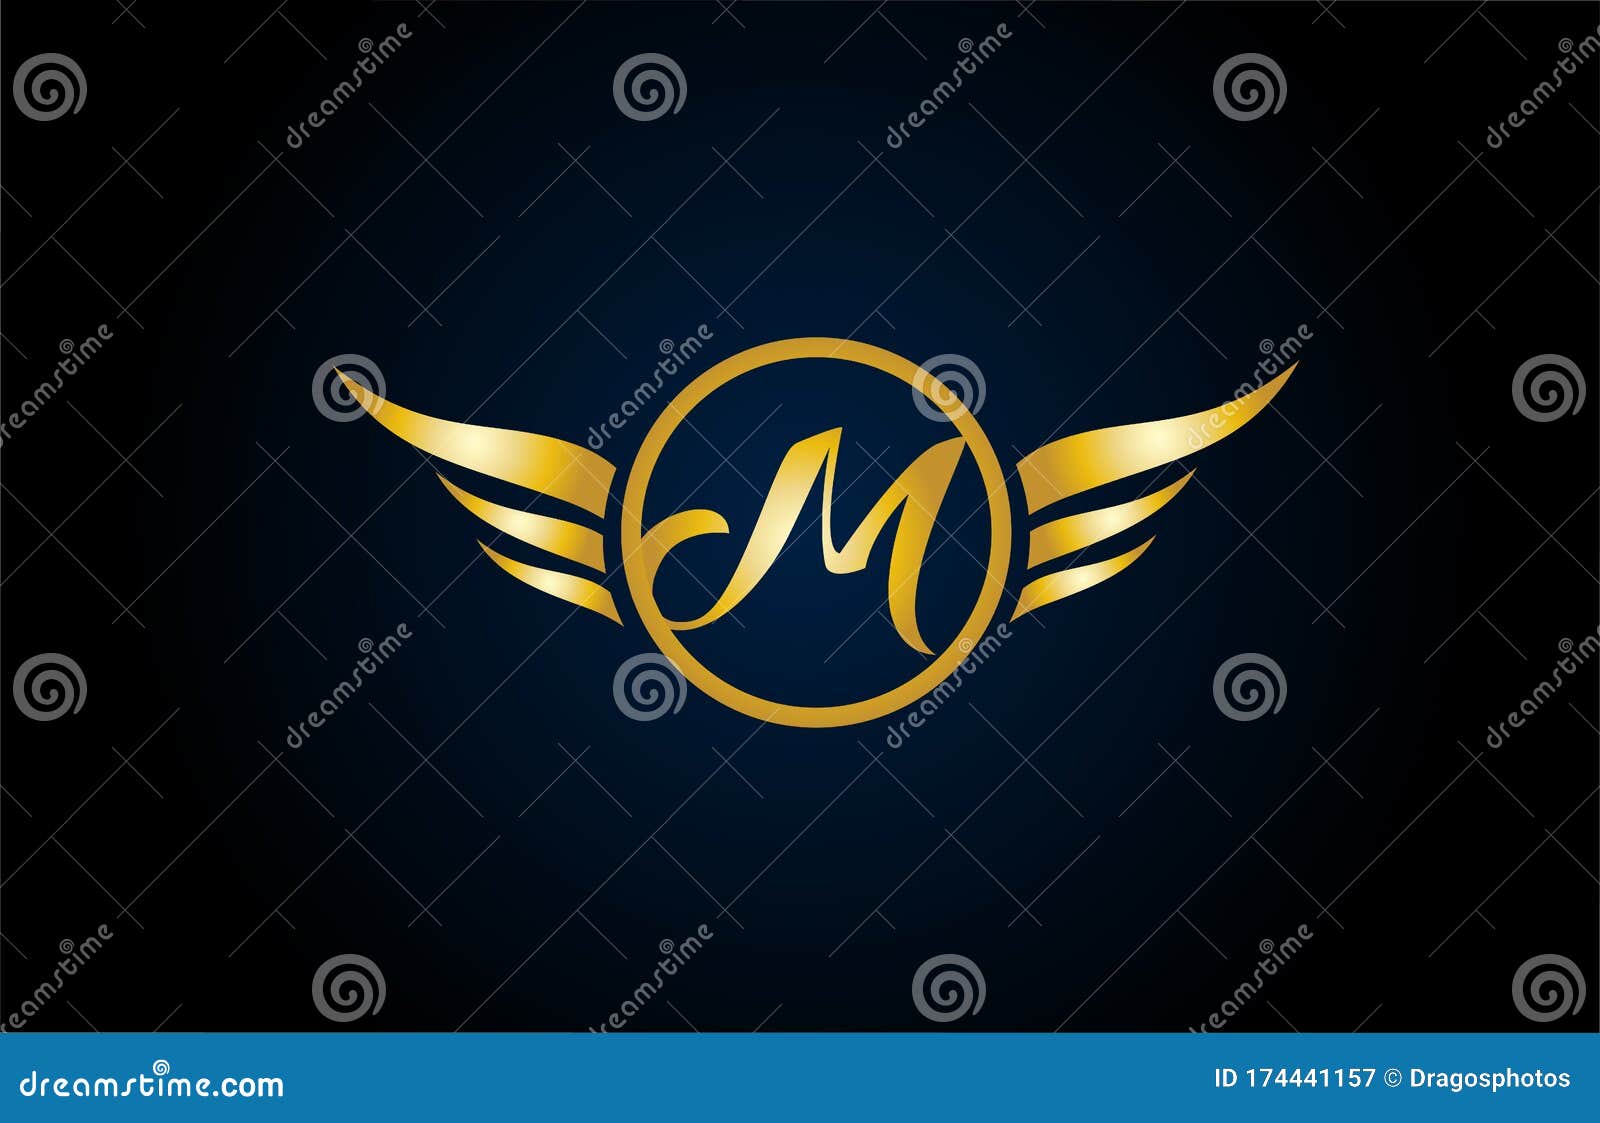 Gold Golden M Wing Wings Alphabet Letter Logo Icon with Classy ...